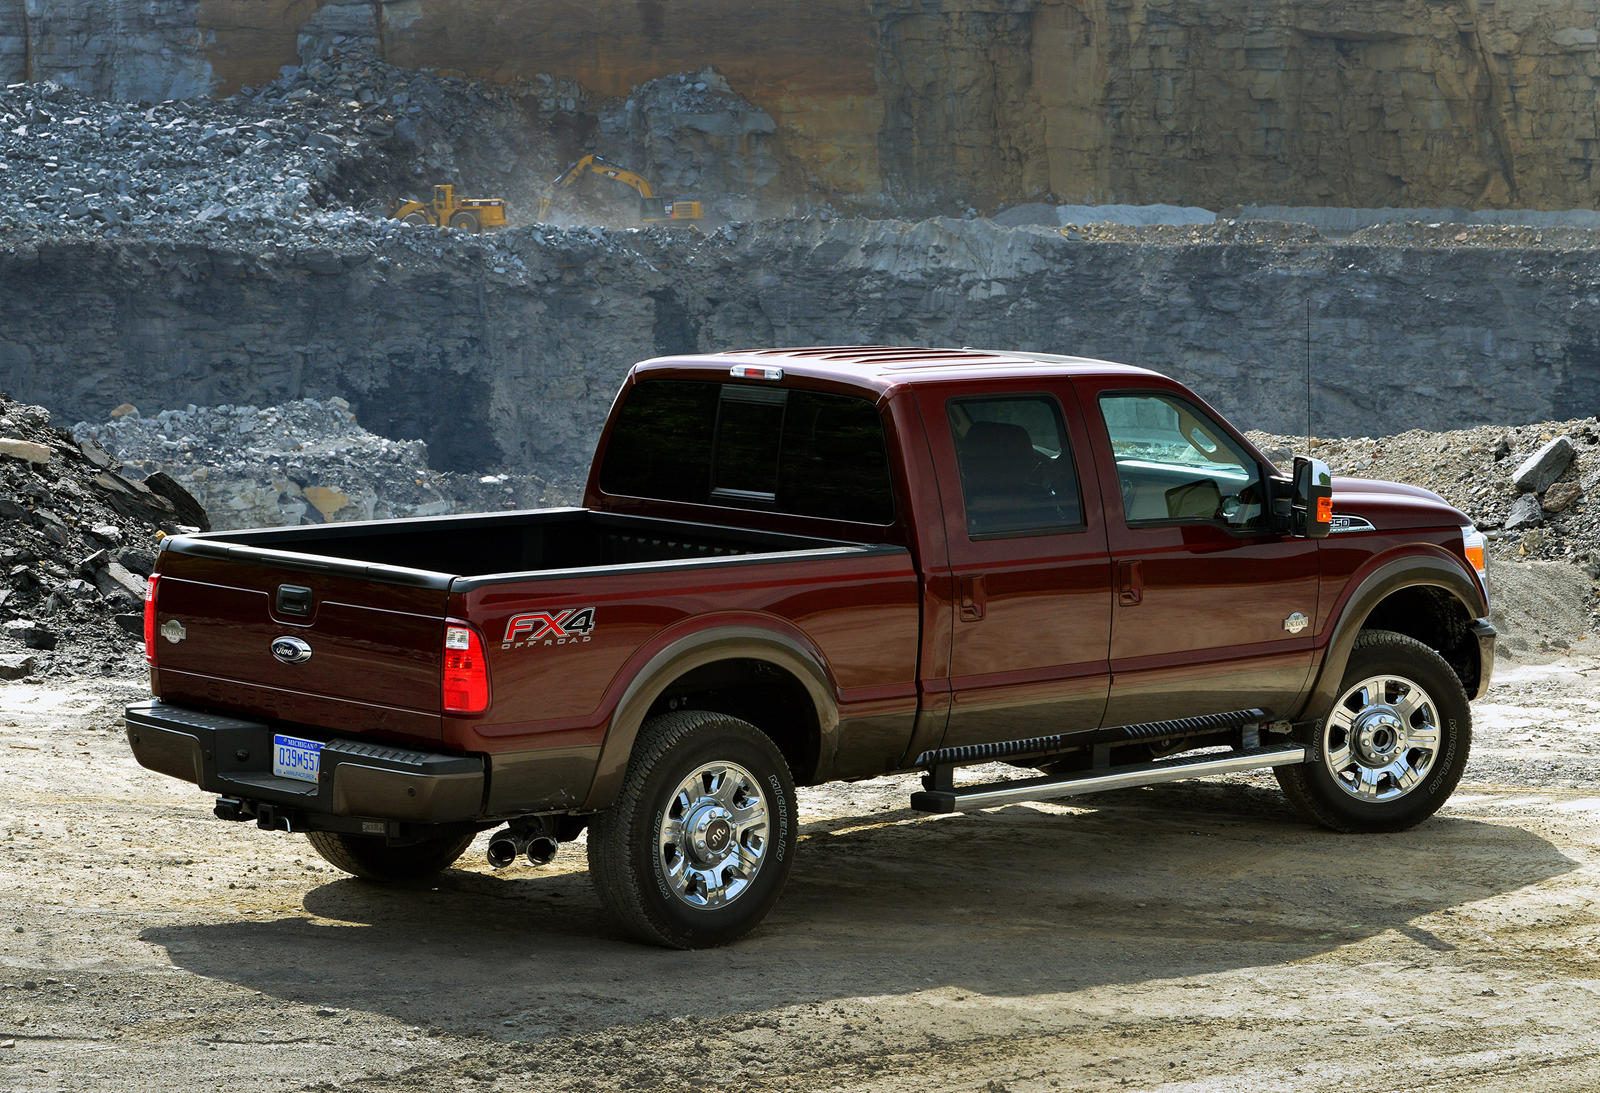 2014 Ford F 250 Super Duty Review Trims Specs Price New Interior